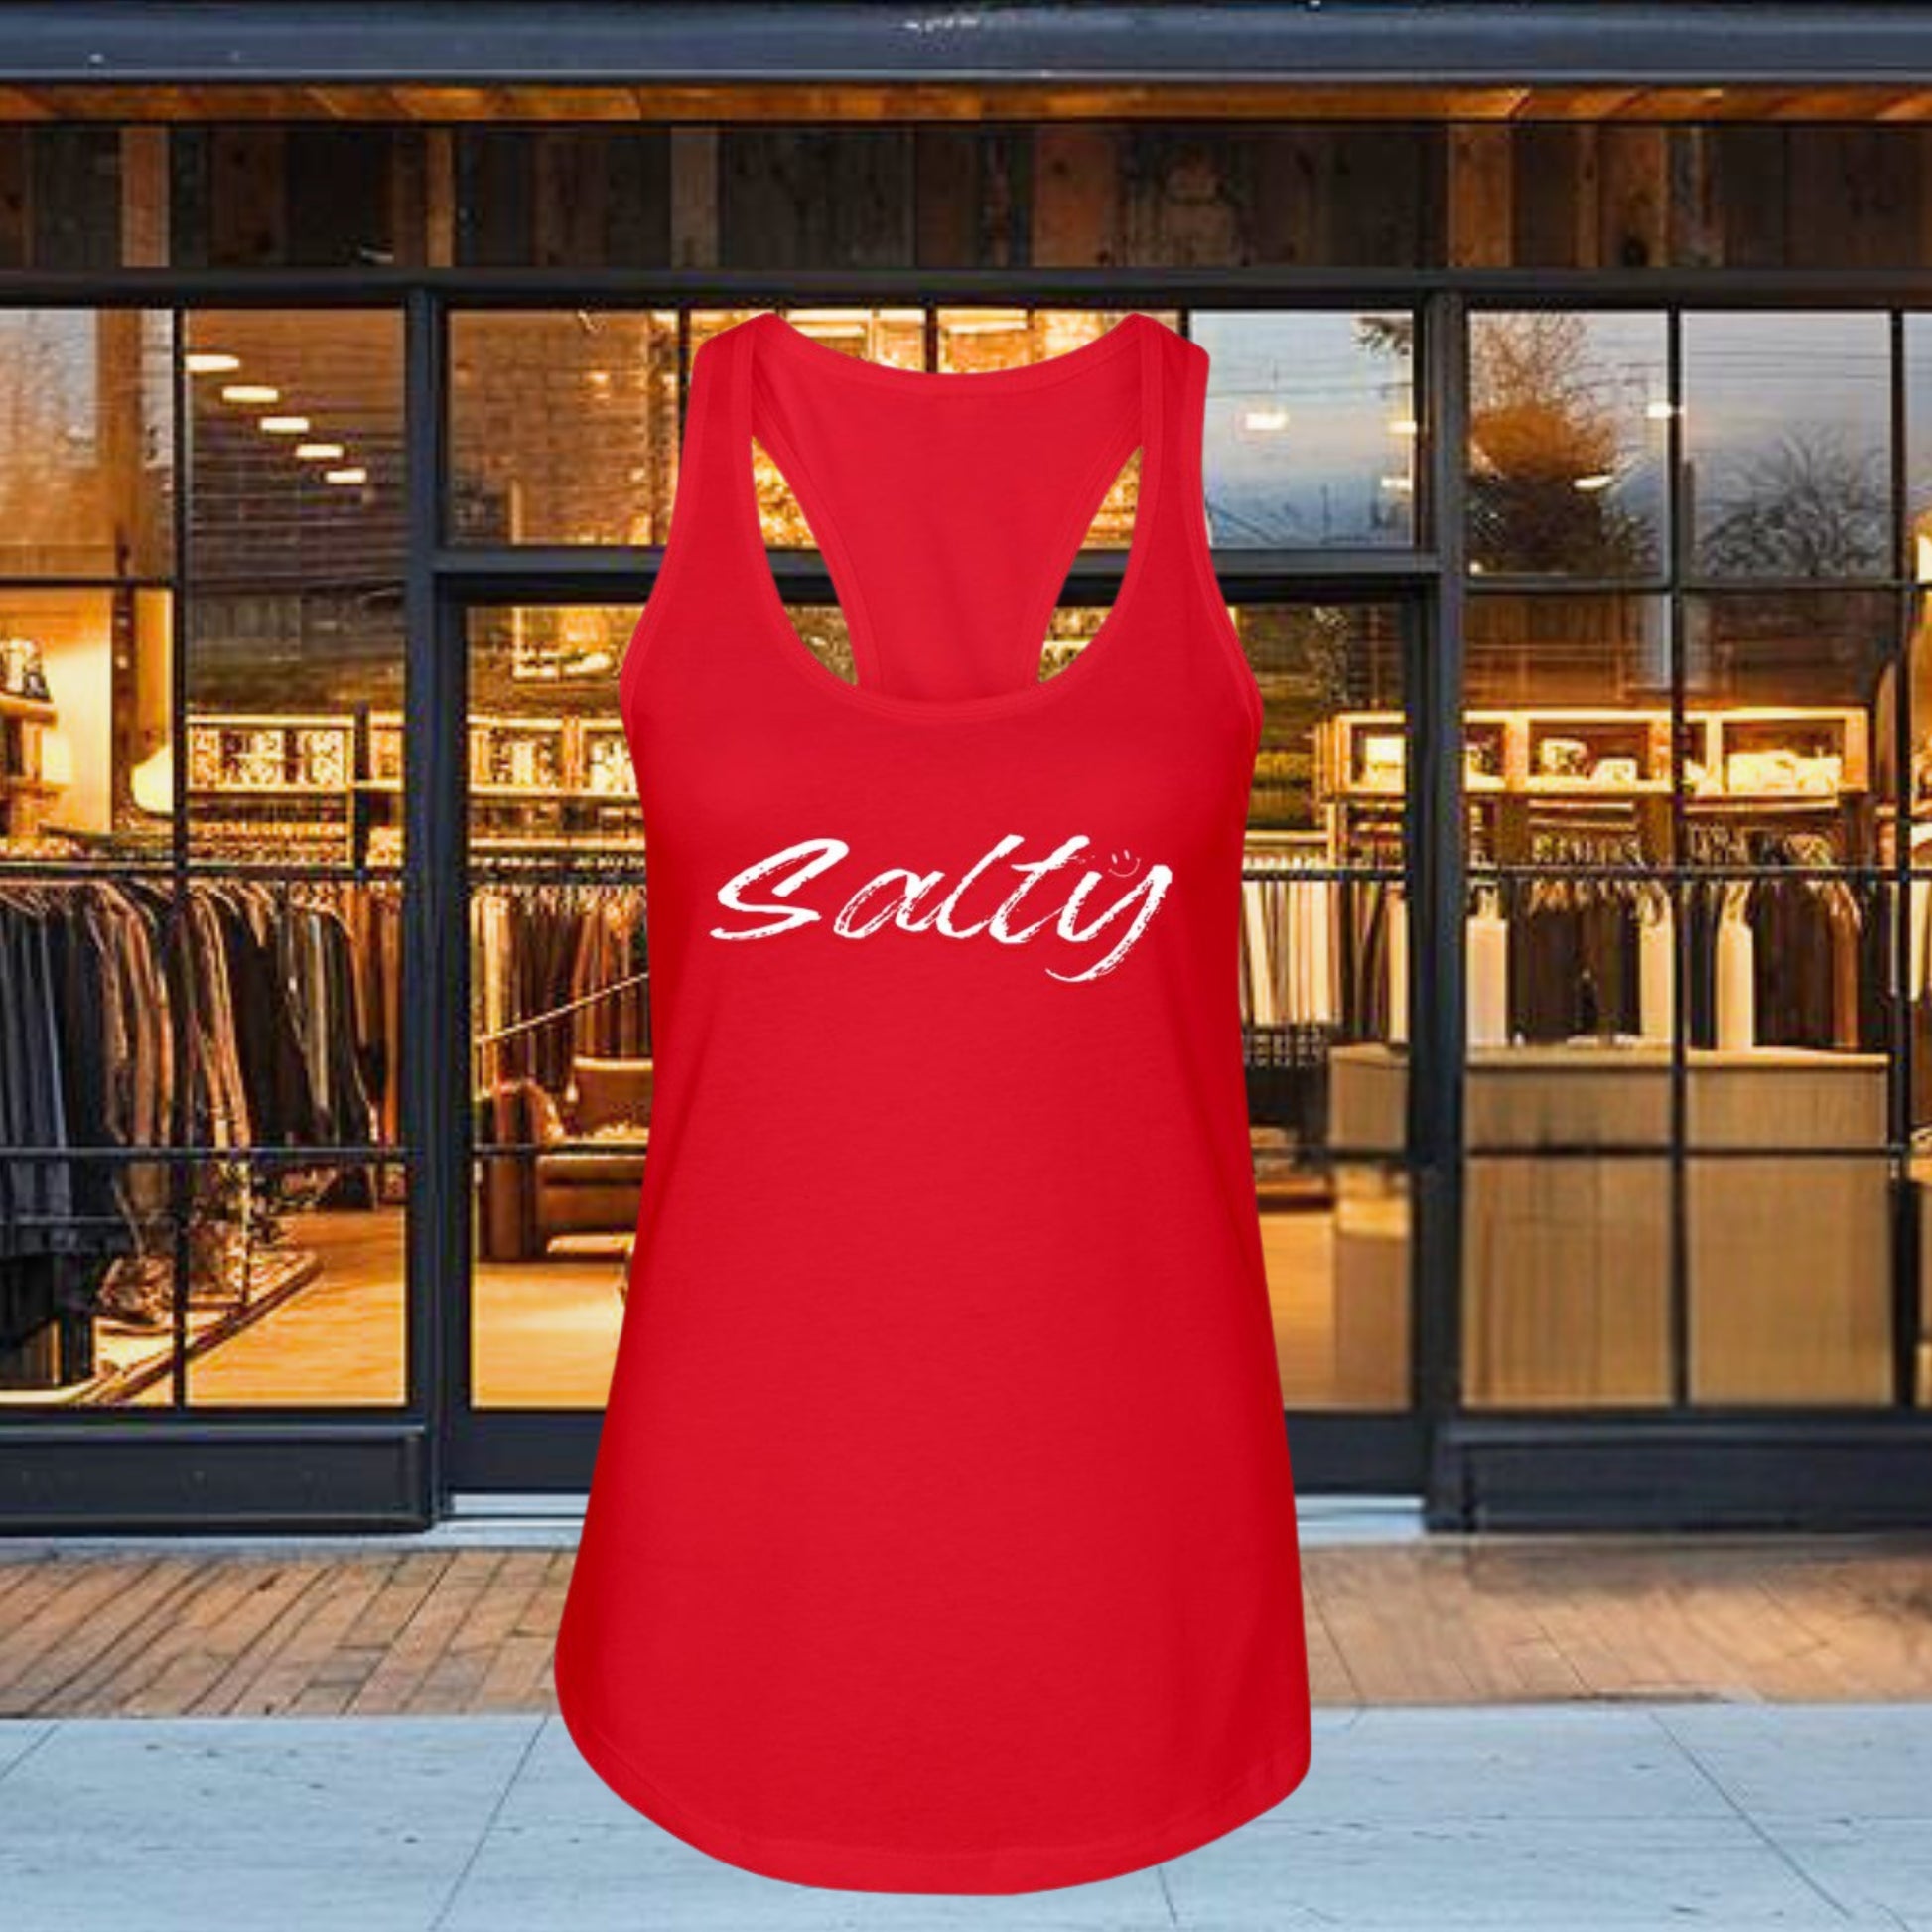 "Salty" Racerback Tank is designed for those who crave adventure and live life to the fullest. 